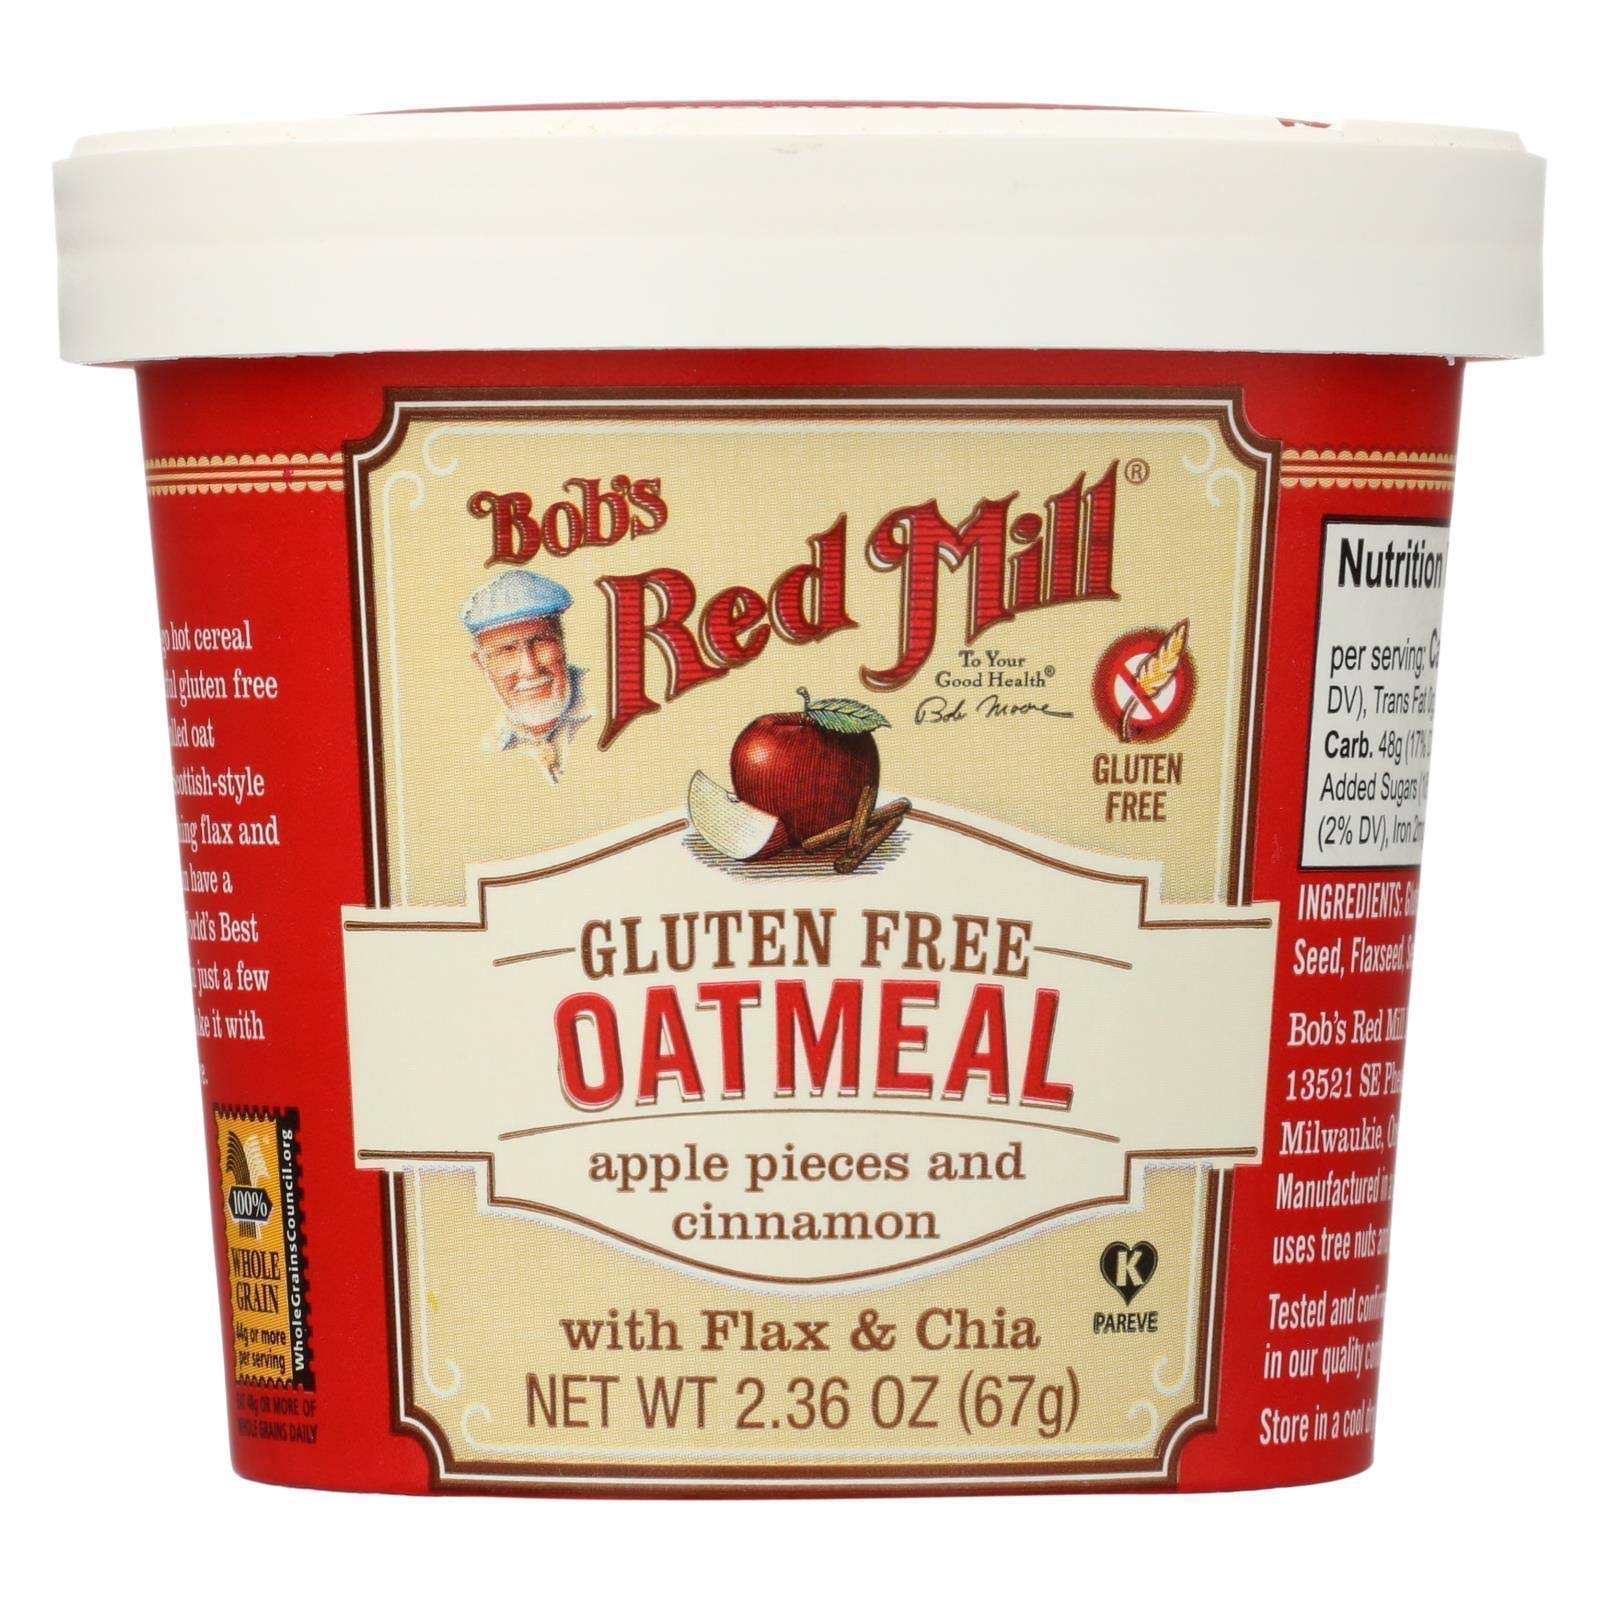 Bob's Red Mill Apple Pieces and Cinnamon Oatmeal - 2.36oz